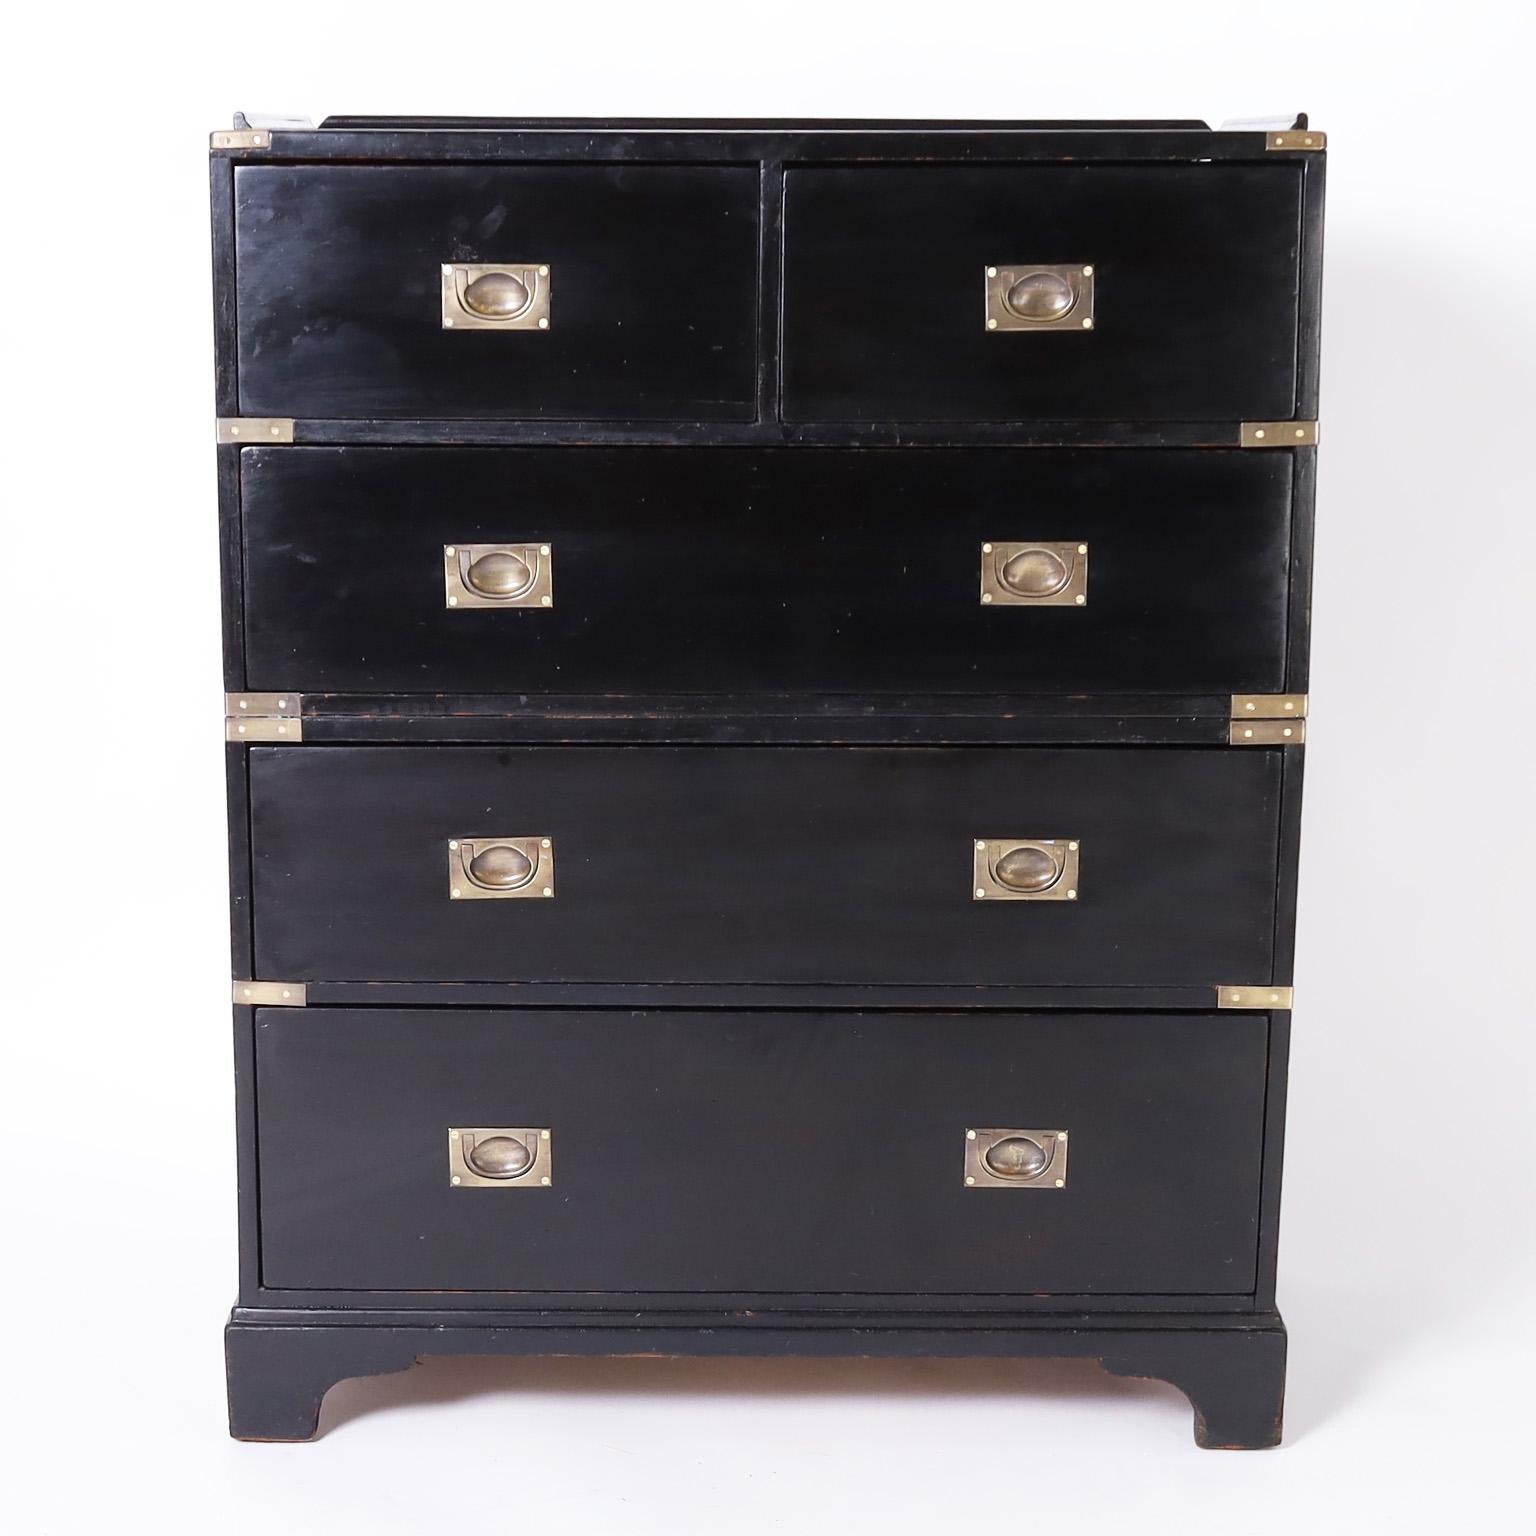 Standout British Colonial campaign chest crafted in hardwoods with five drawers having an ebonized finish, gallery on the top, brass hardware, two piece construction and classic bracket feet.